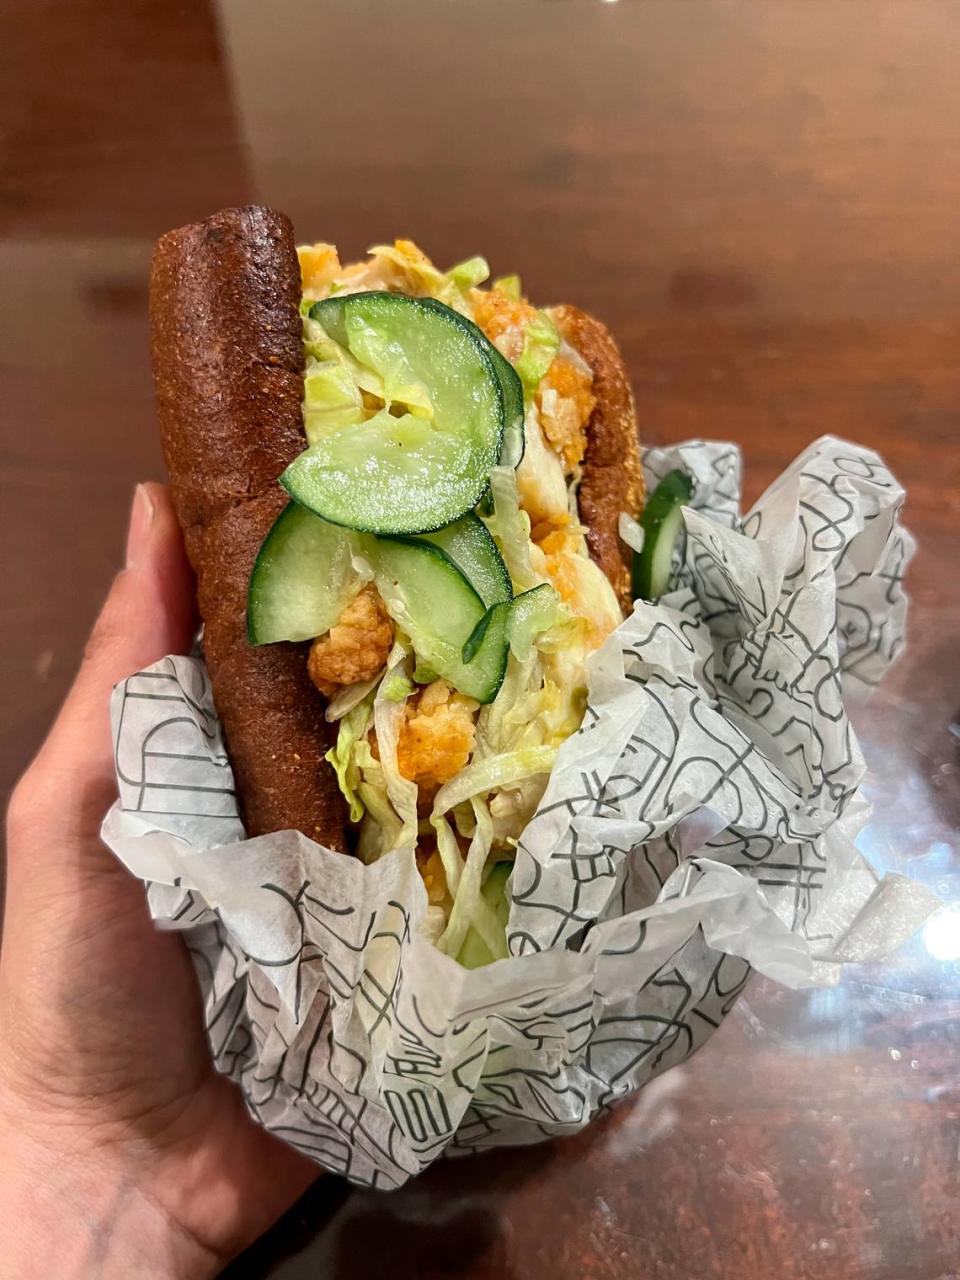 Publix’s chicken tender PubSub is so popular it has its own Facebook fan page.